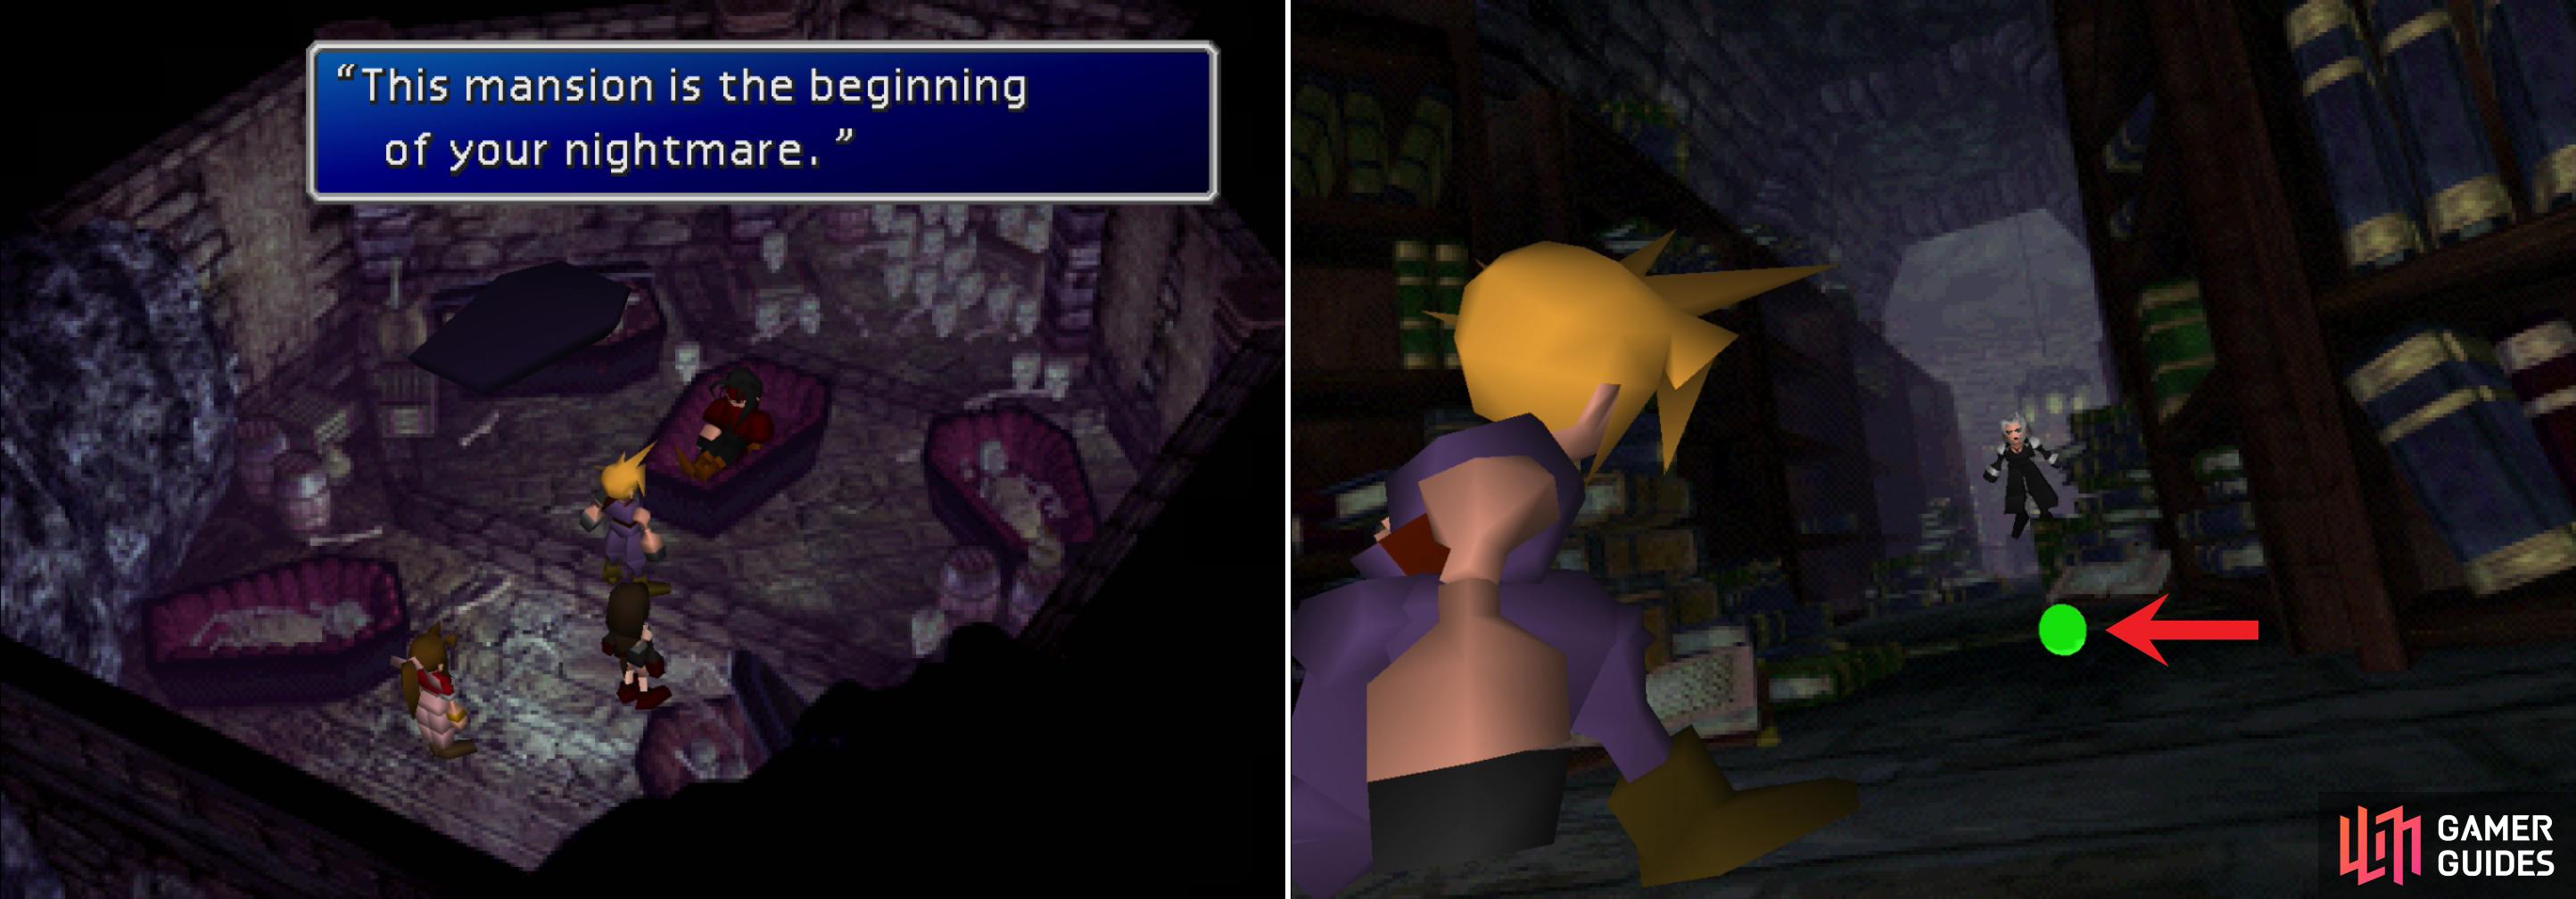 With the Key to the Basement in your hands, you can rouse a slumbering sinner in the bowels of the Shinra Mansion (left). If you continue into the offices youll have a brief encounter with Sephiroth, who tosses you a piece of Destruct Materia (right).